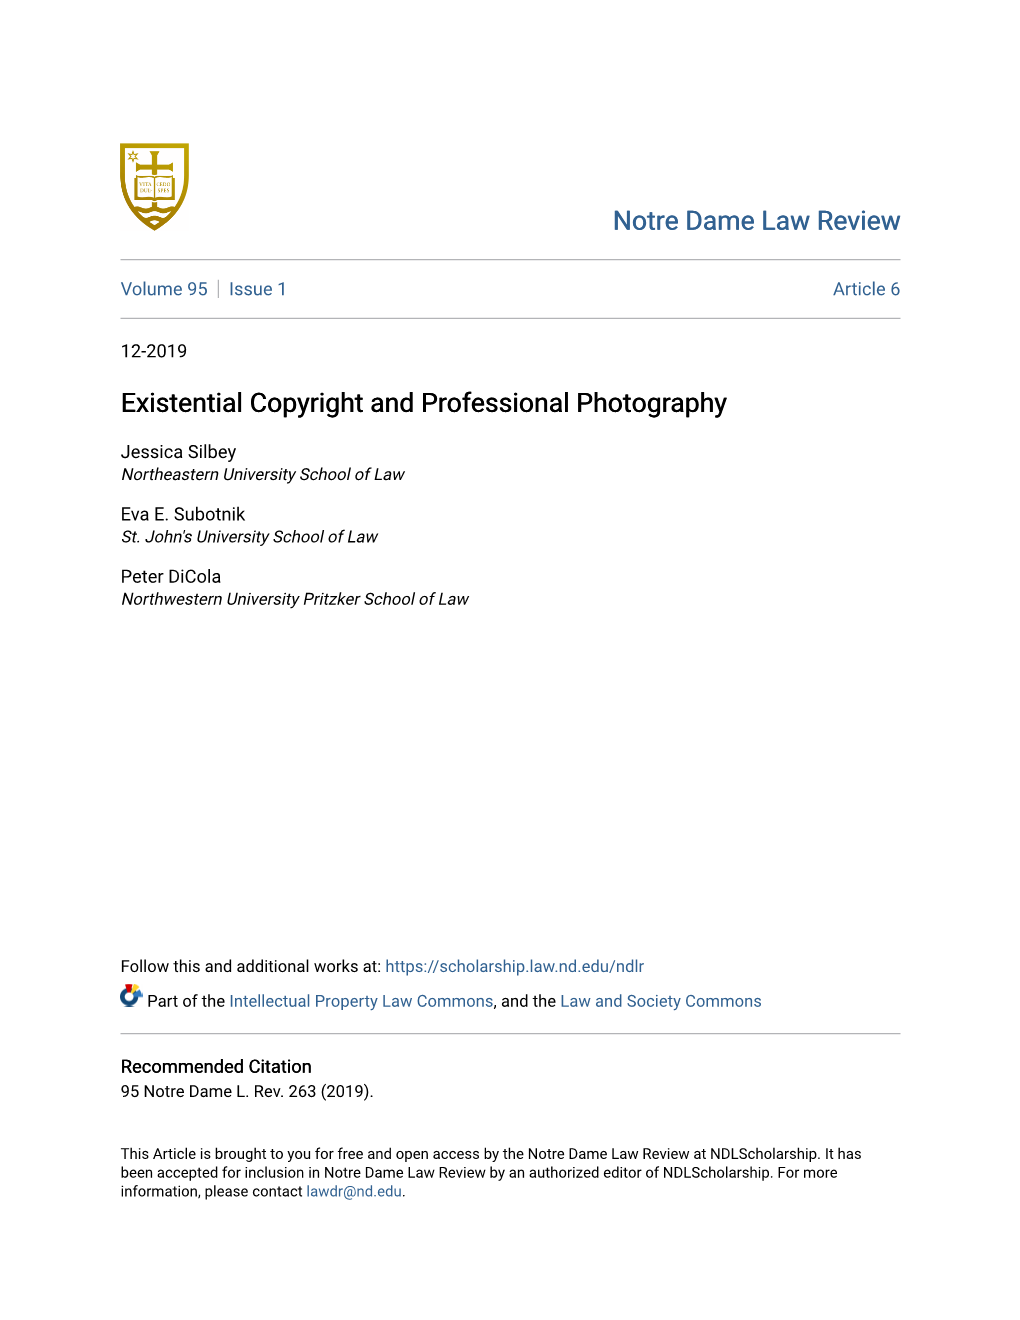 Existential Copyright and Professional Photography